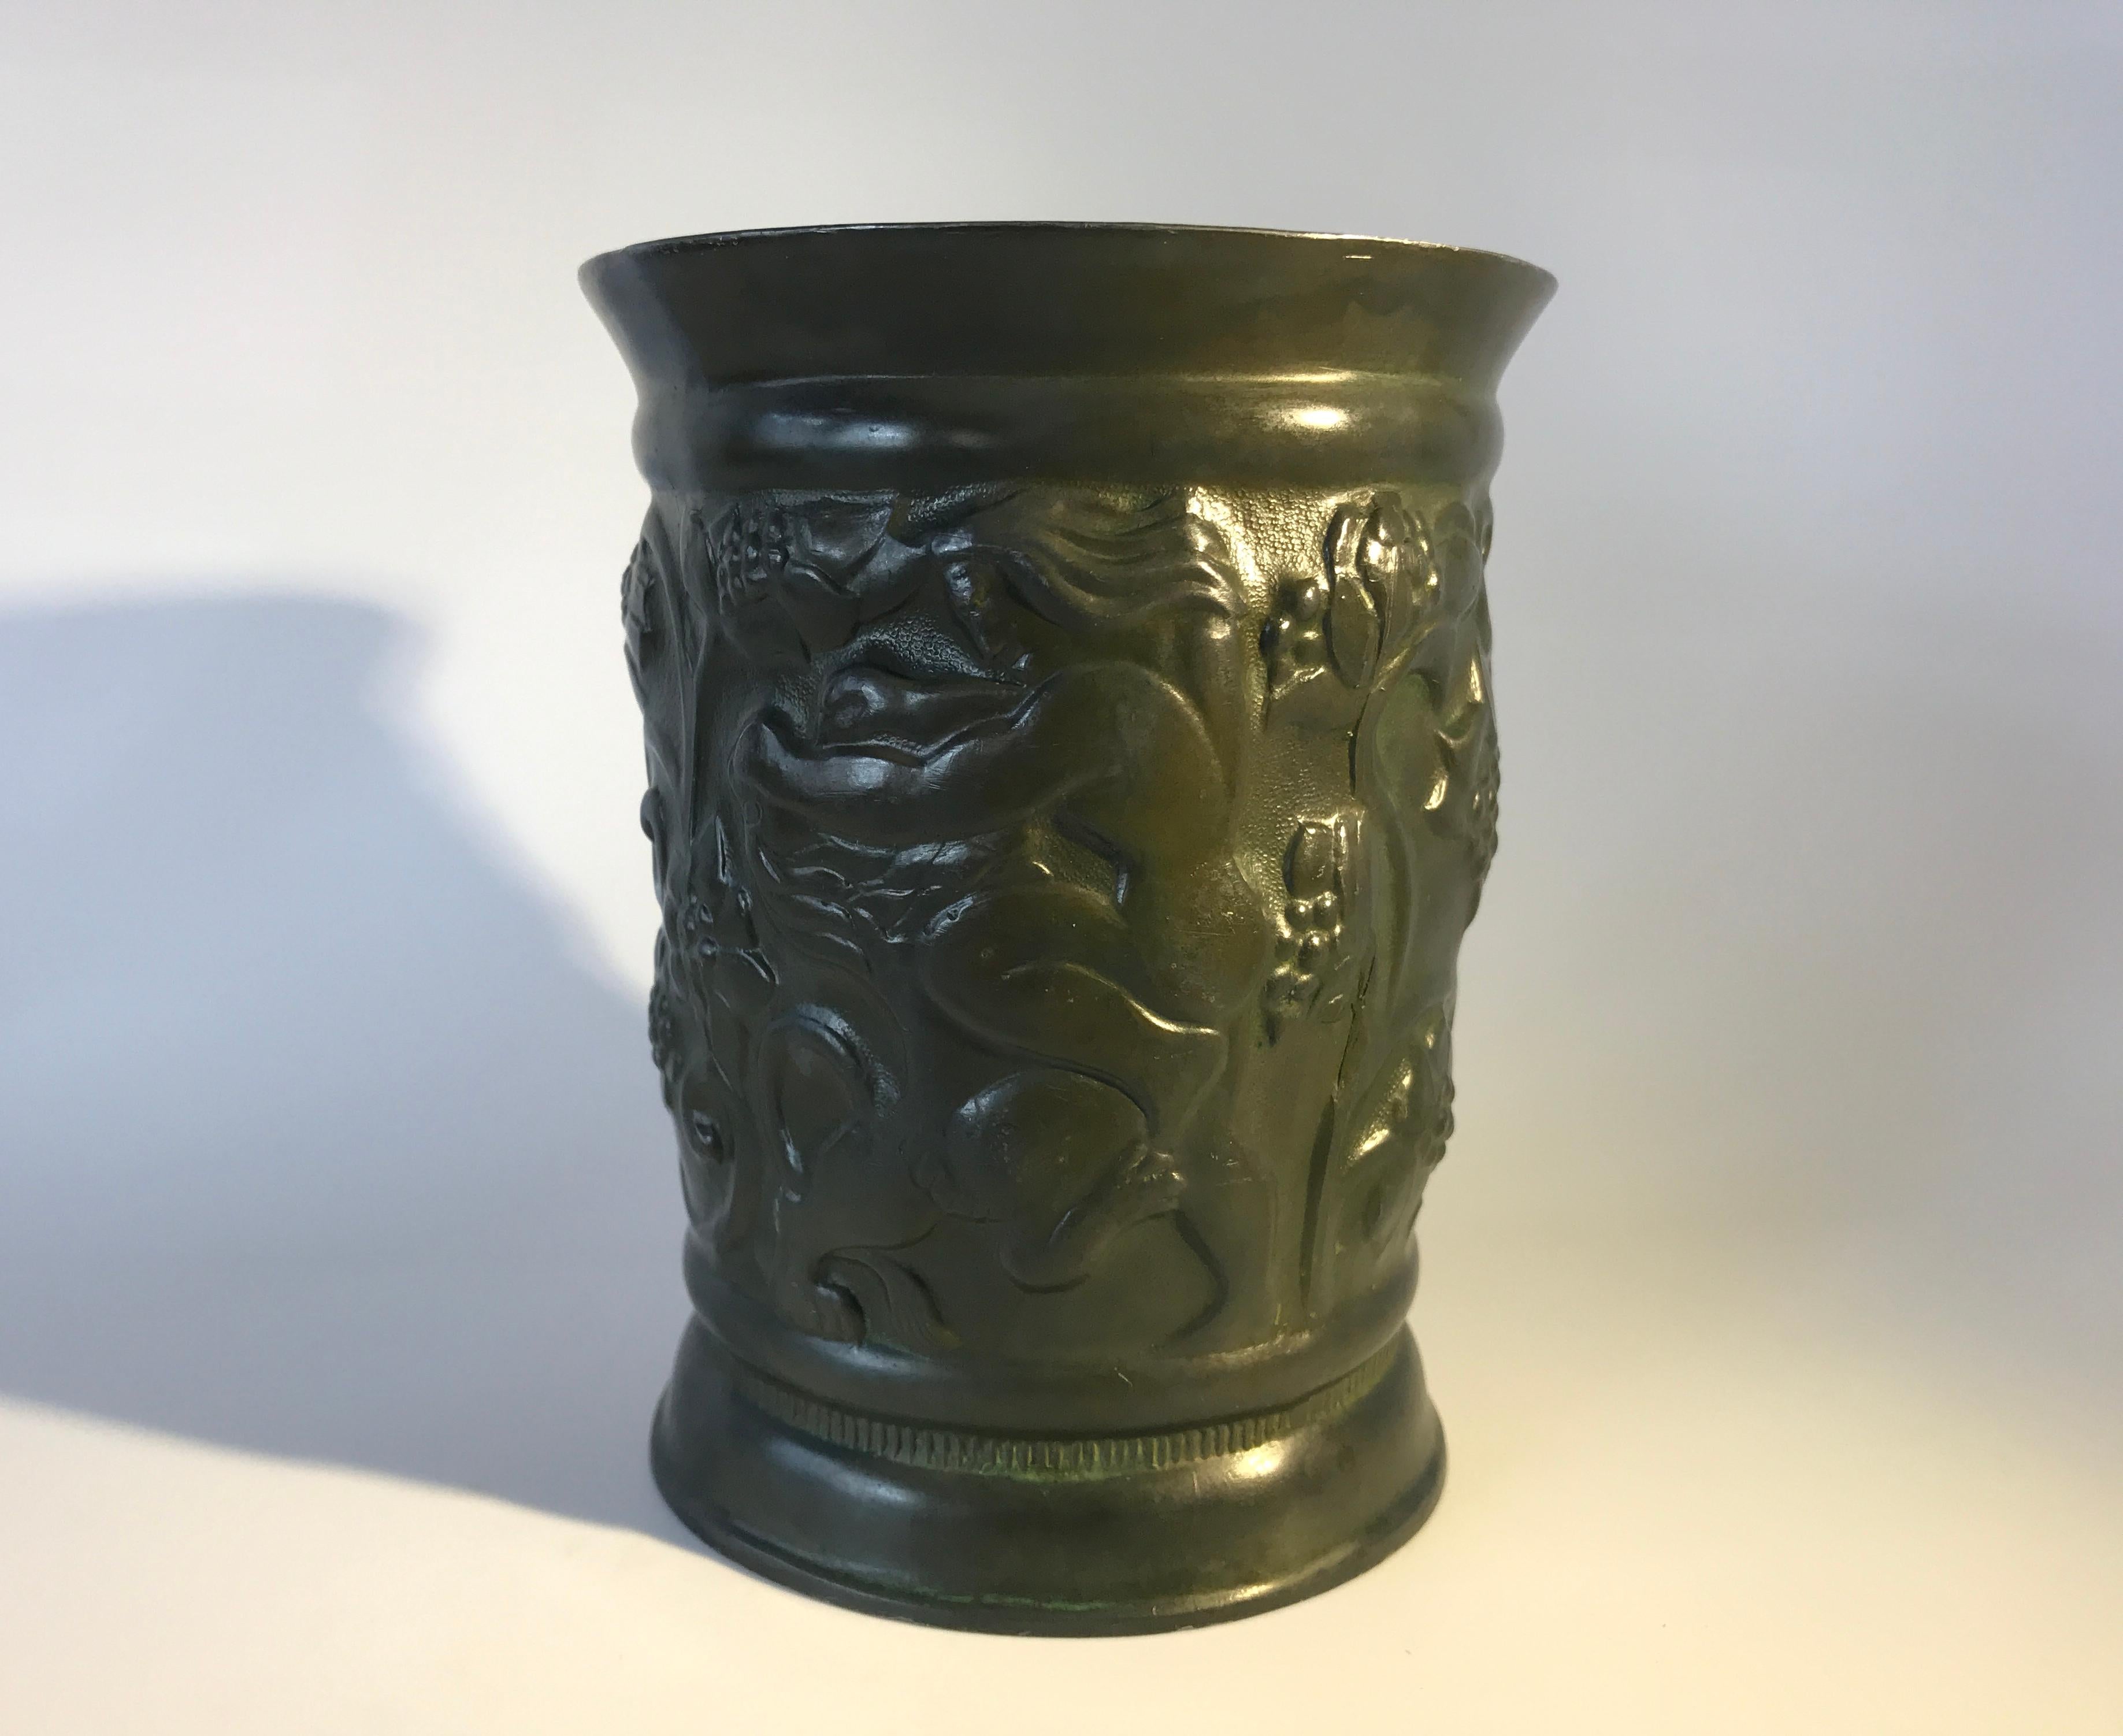 Just Andersen of Denmark, Art Deco Disko metal ware vase featuring a Samson and Delilah scene
Great dark Disco patina and a heavyweight piece from Andersen
Scandinavian metal ware at its best
Stamped and numbered 159 to base,
circa 1930s
In